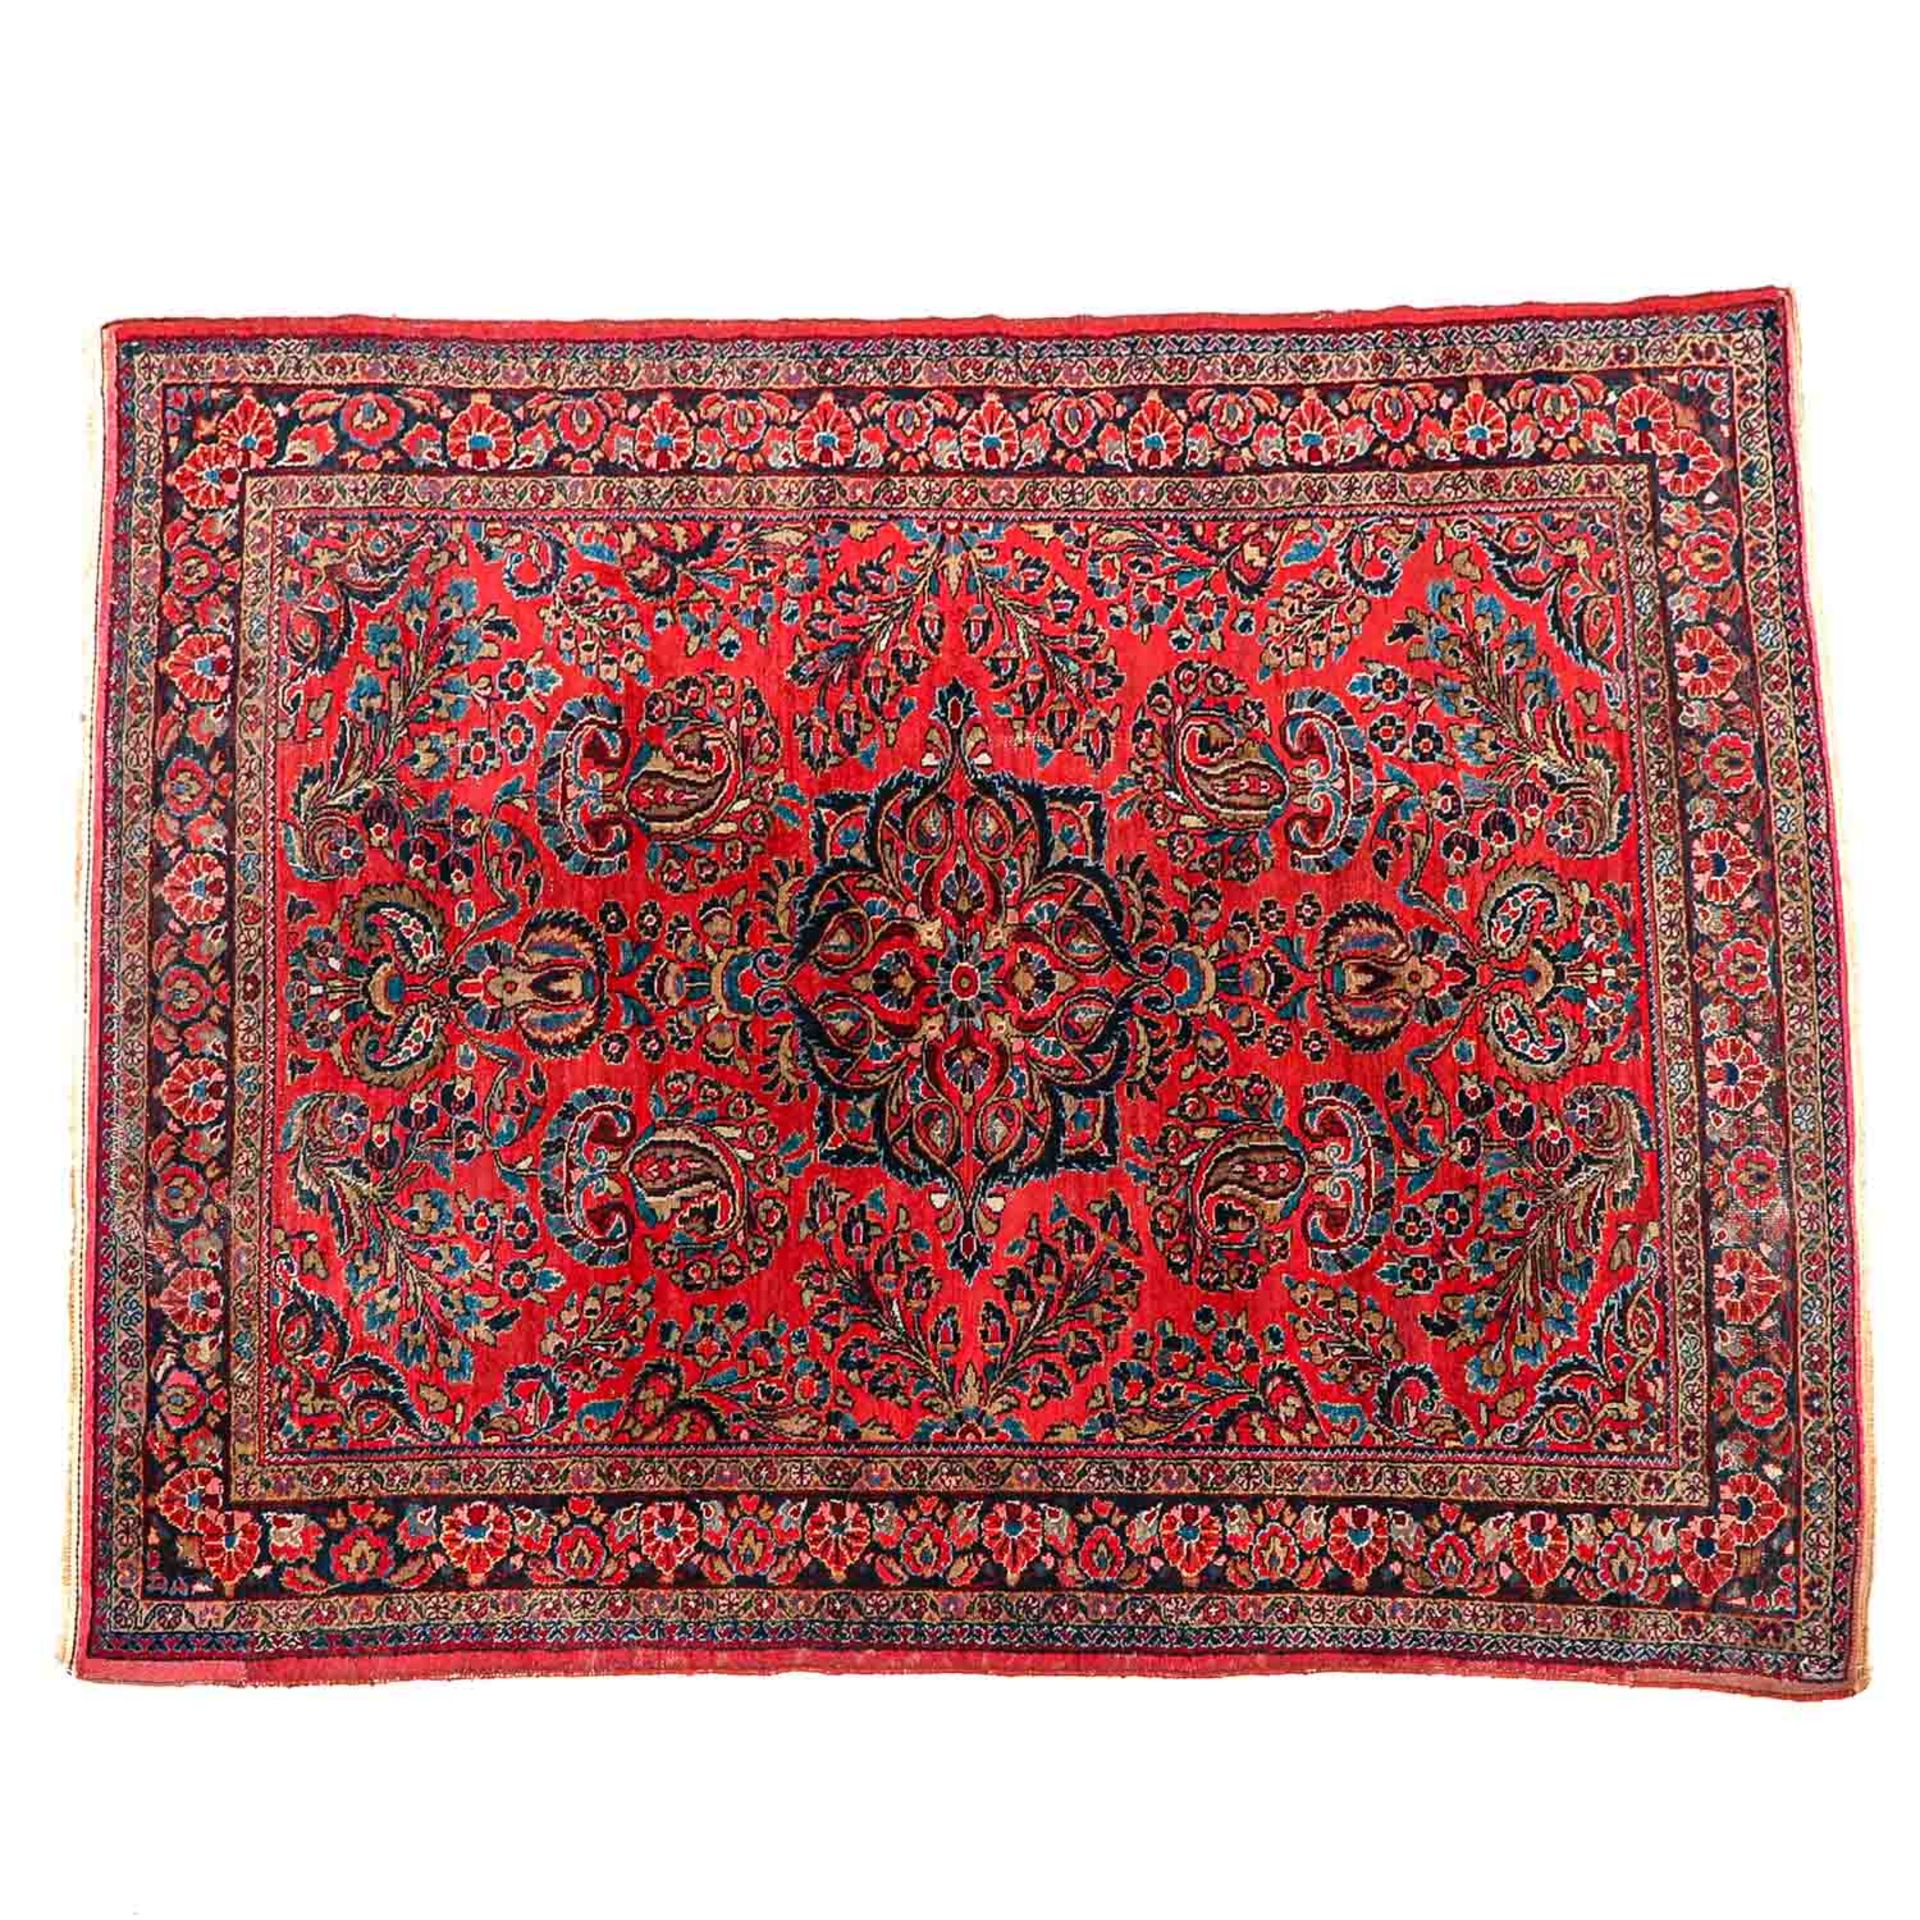 A Collection of 4 Persian Carpets - Image 2 of 9